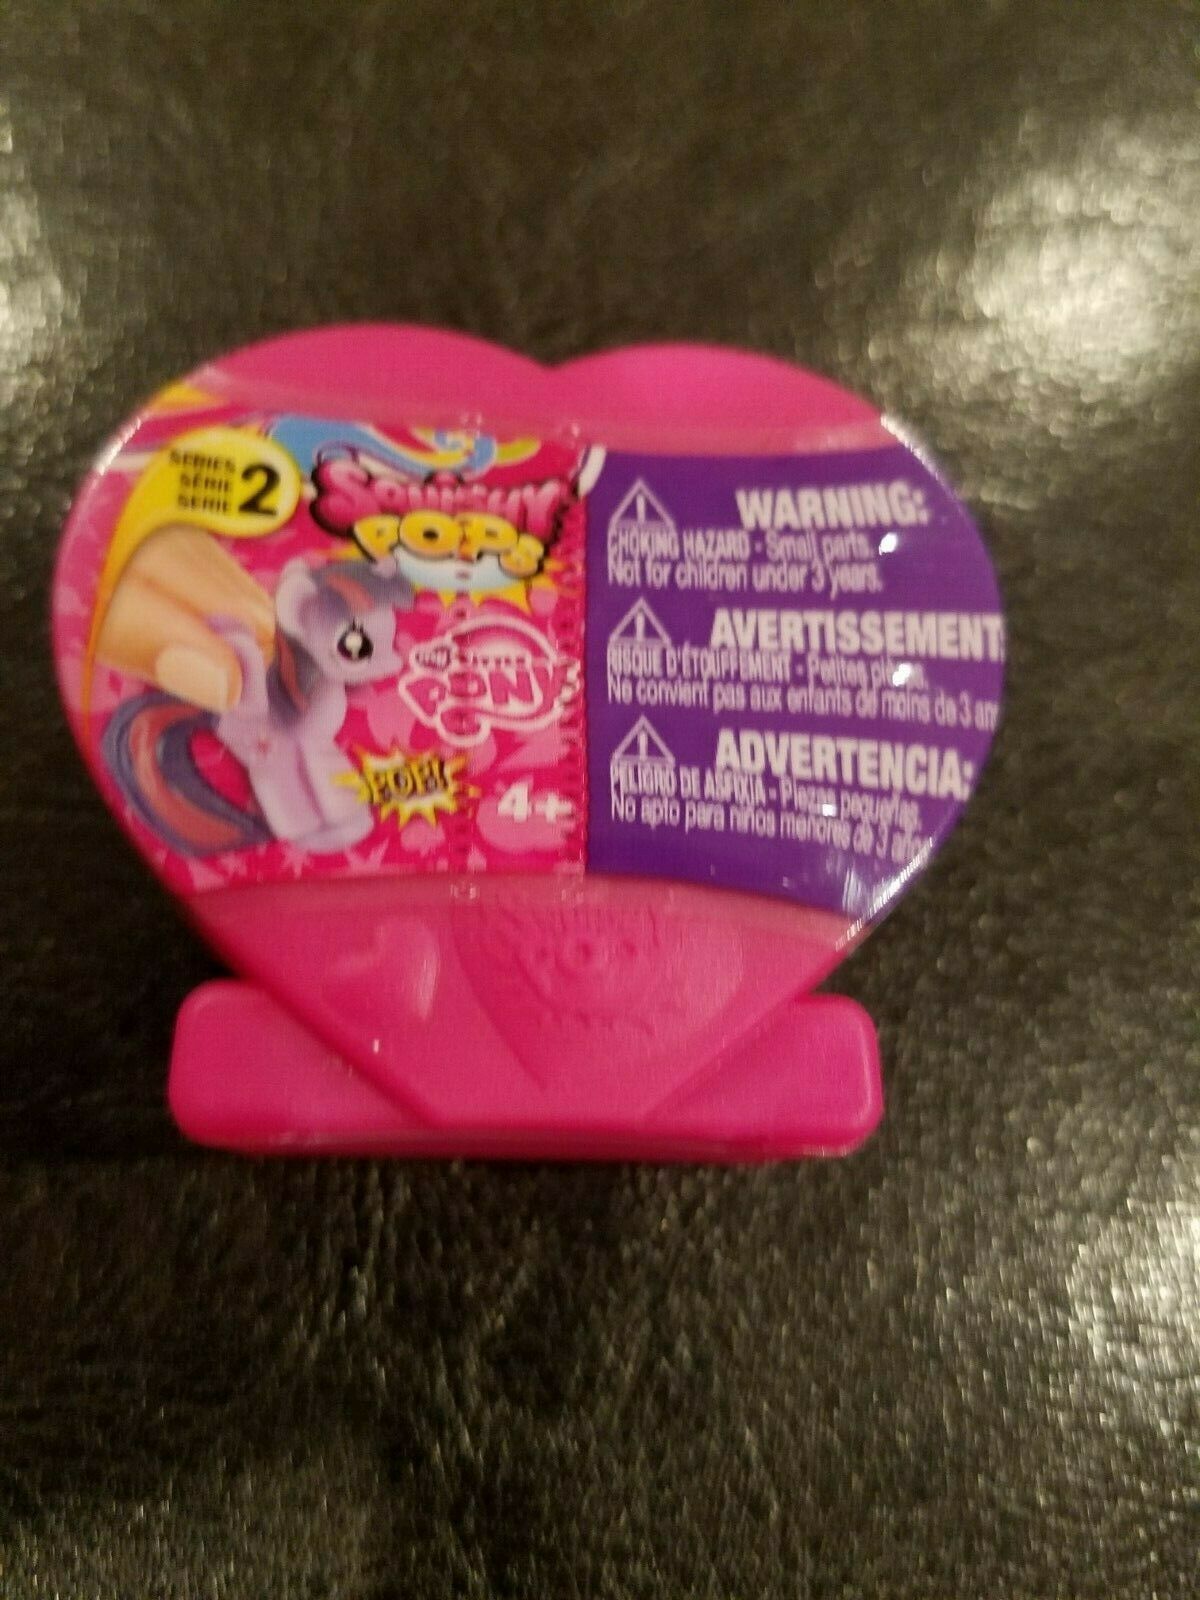 my little pony surprise fashems squishy pops heart shaped series 2